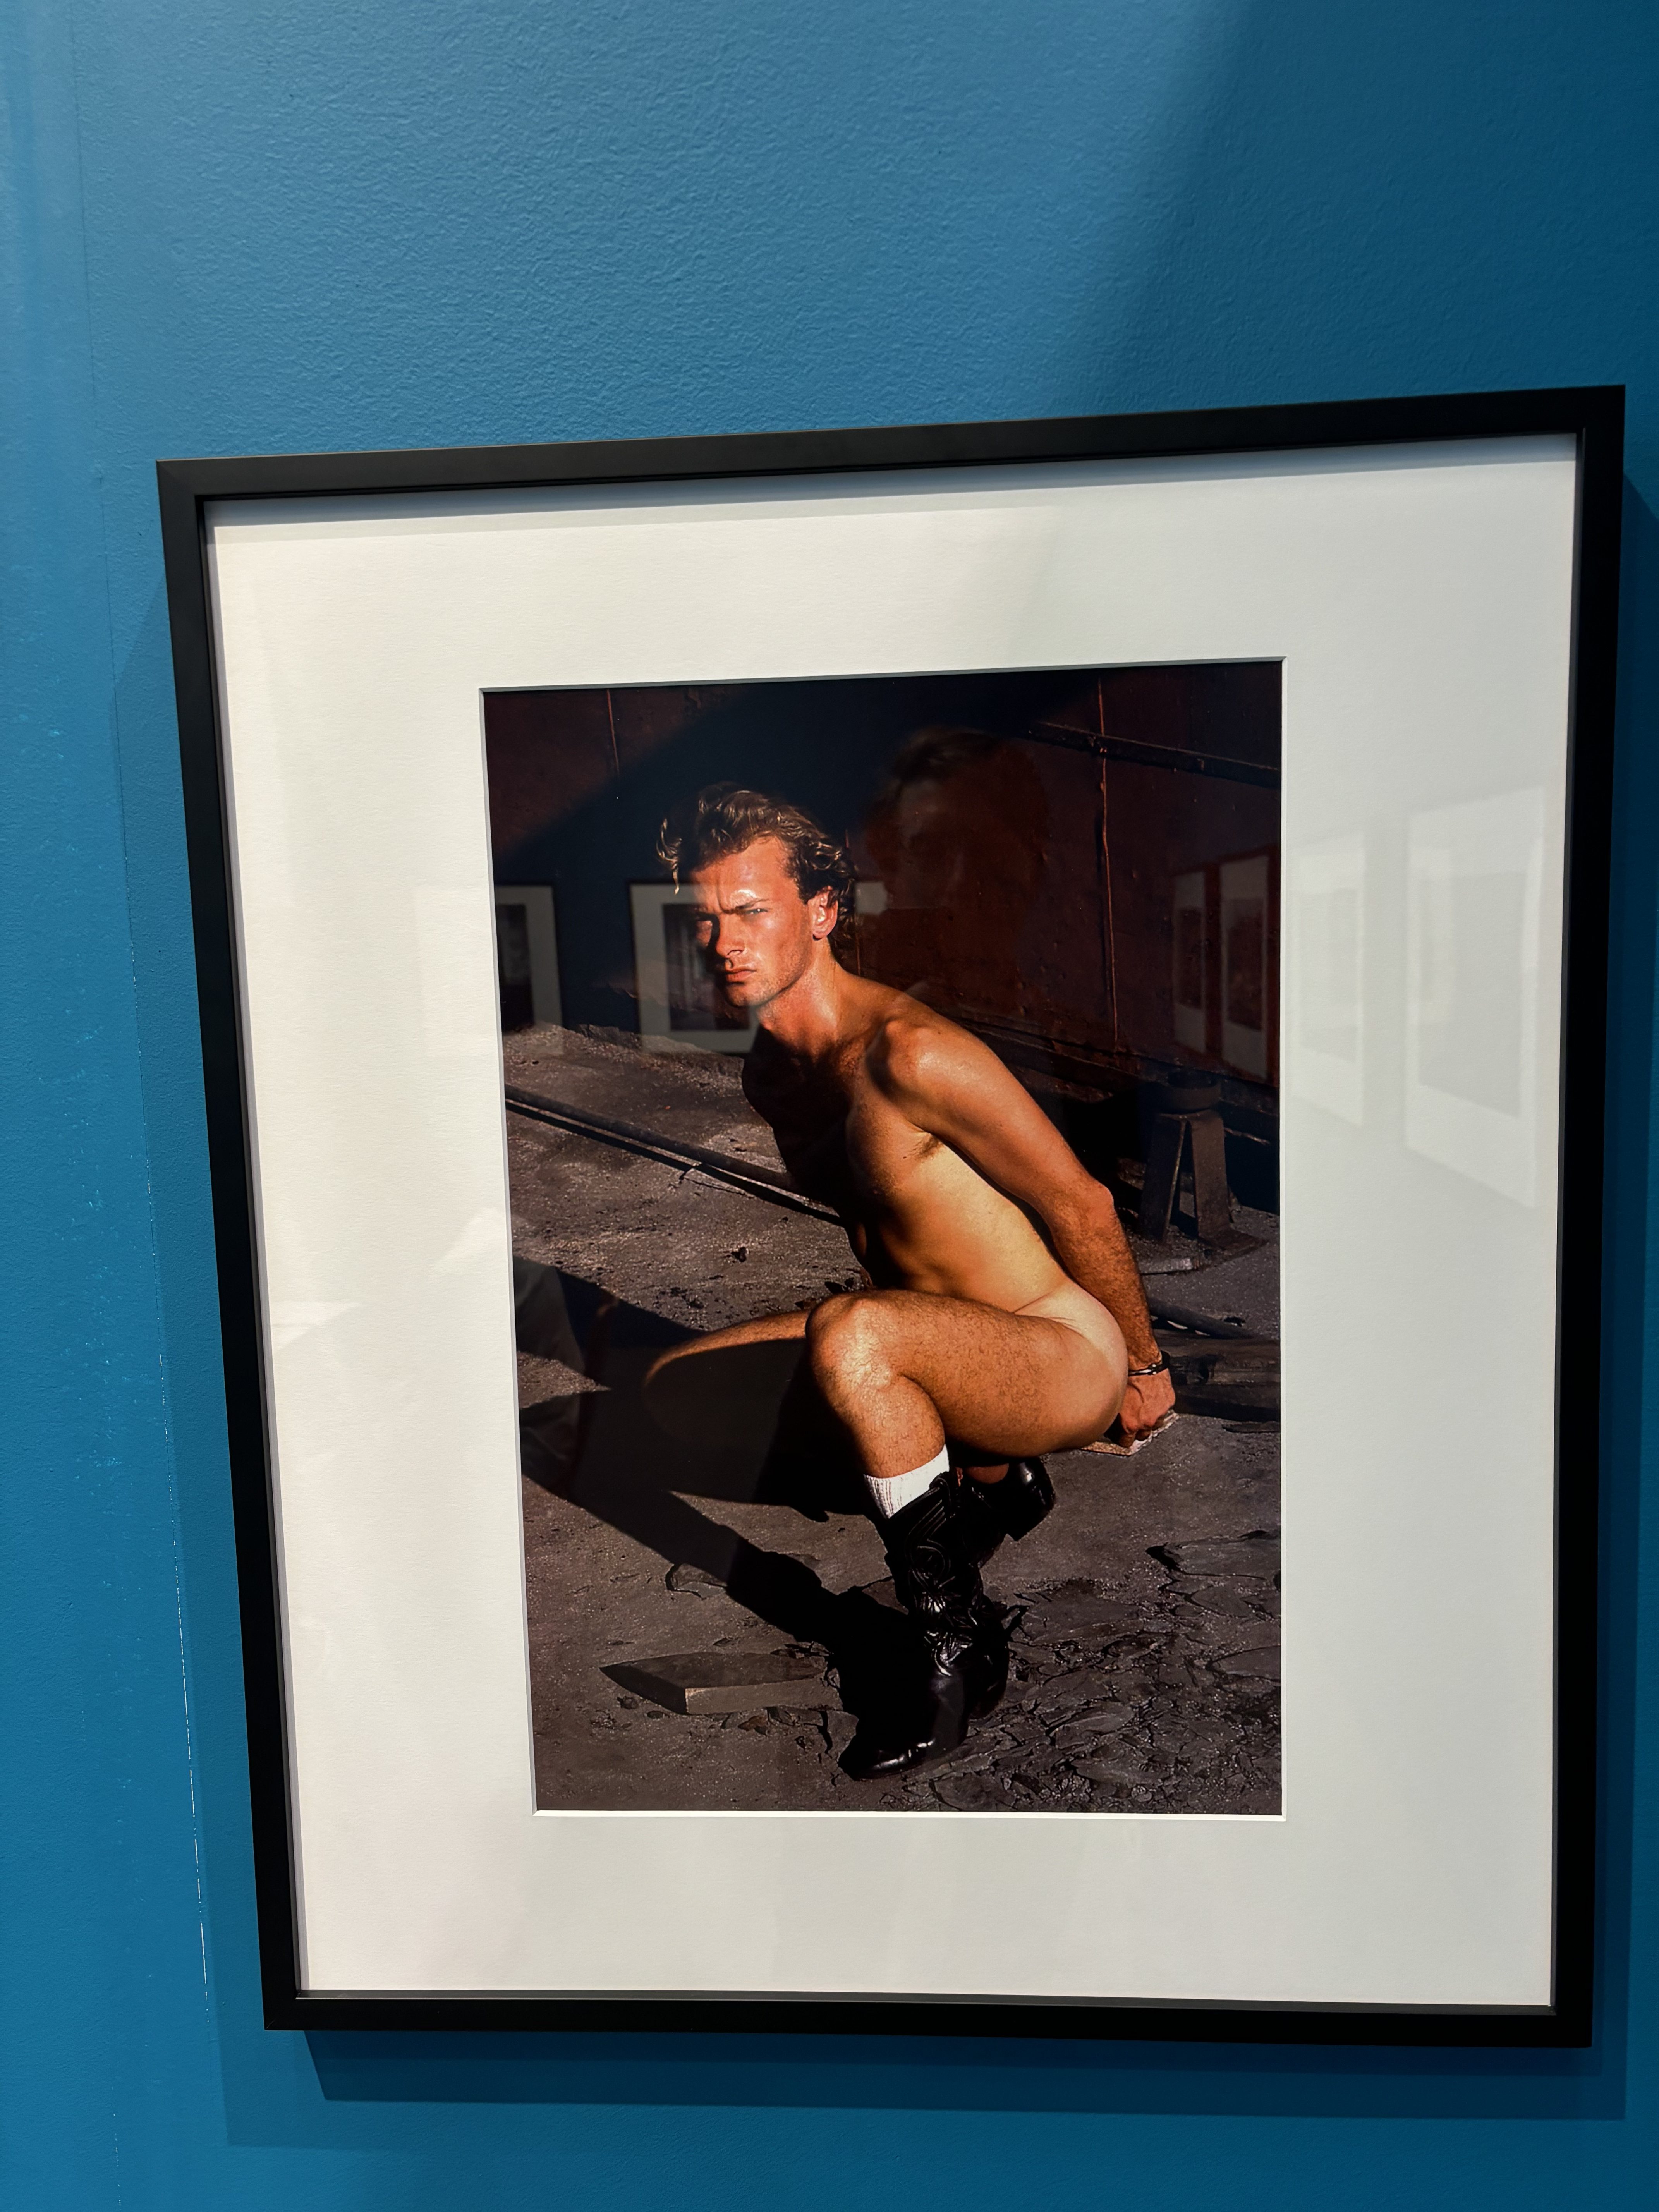 A nude photo of a man in a frame hanging on a blue wall